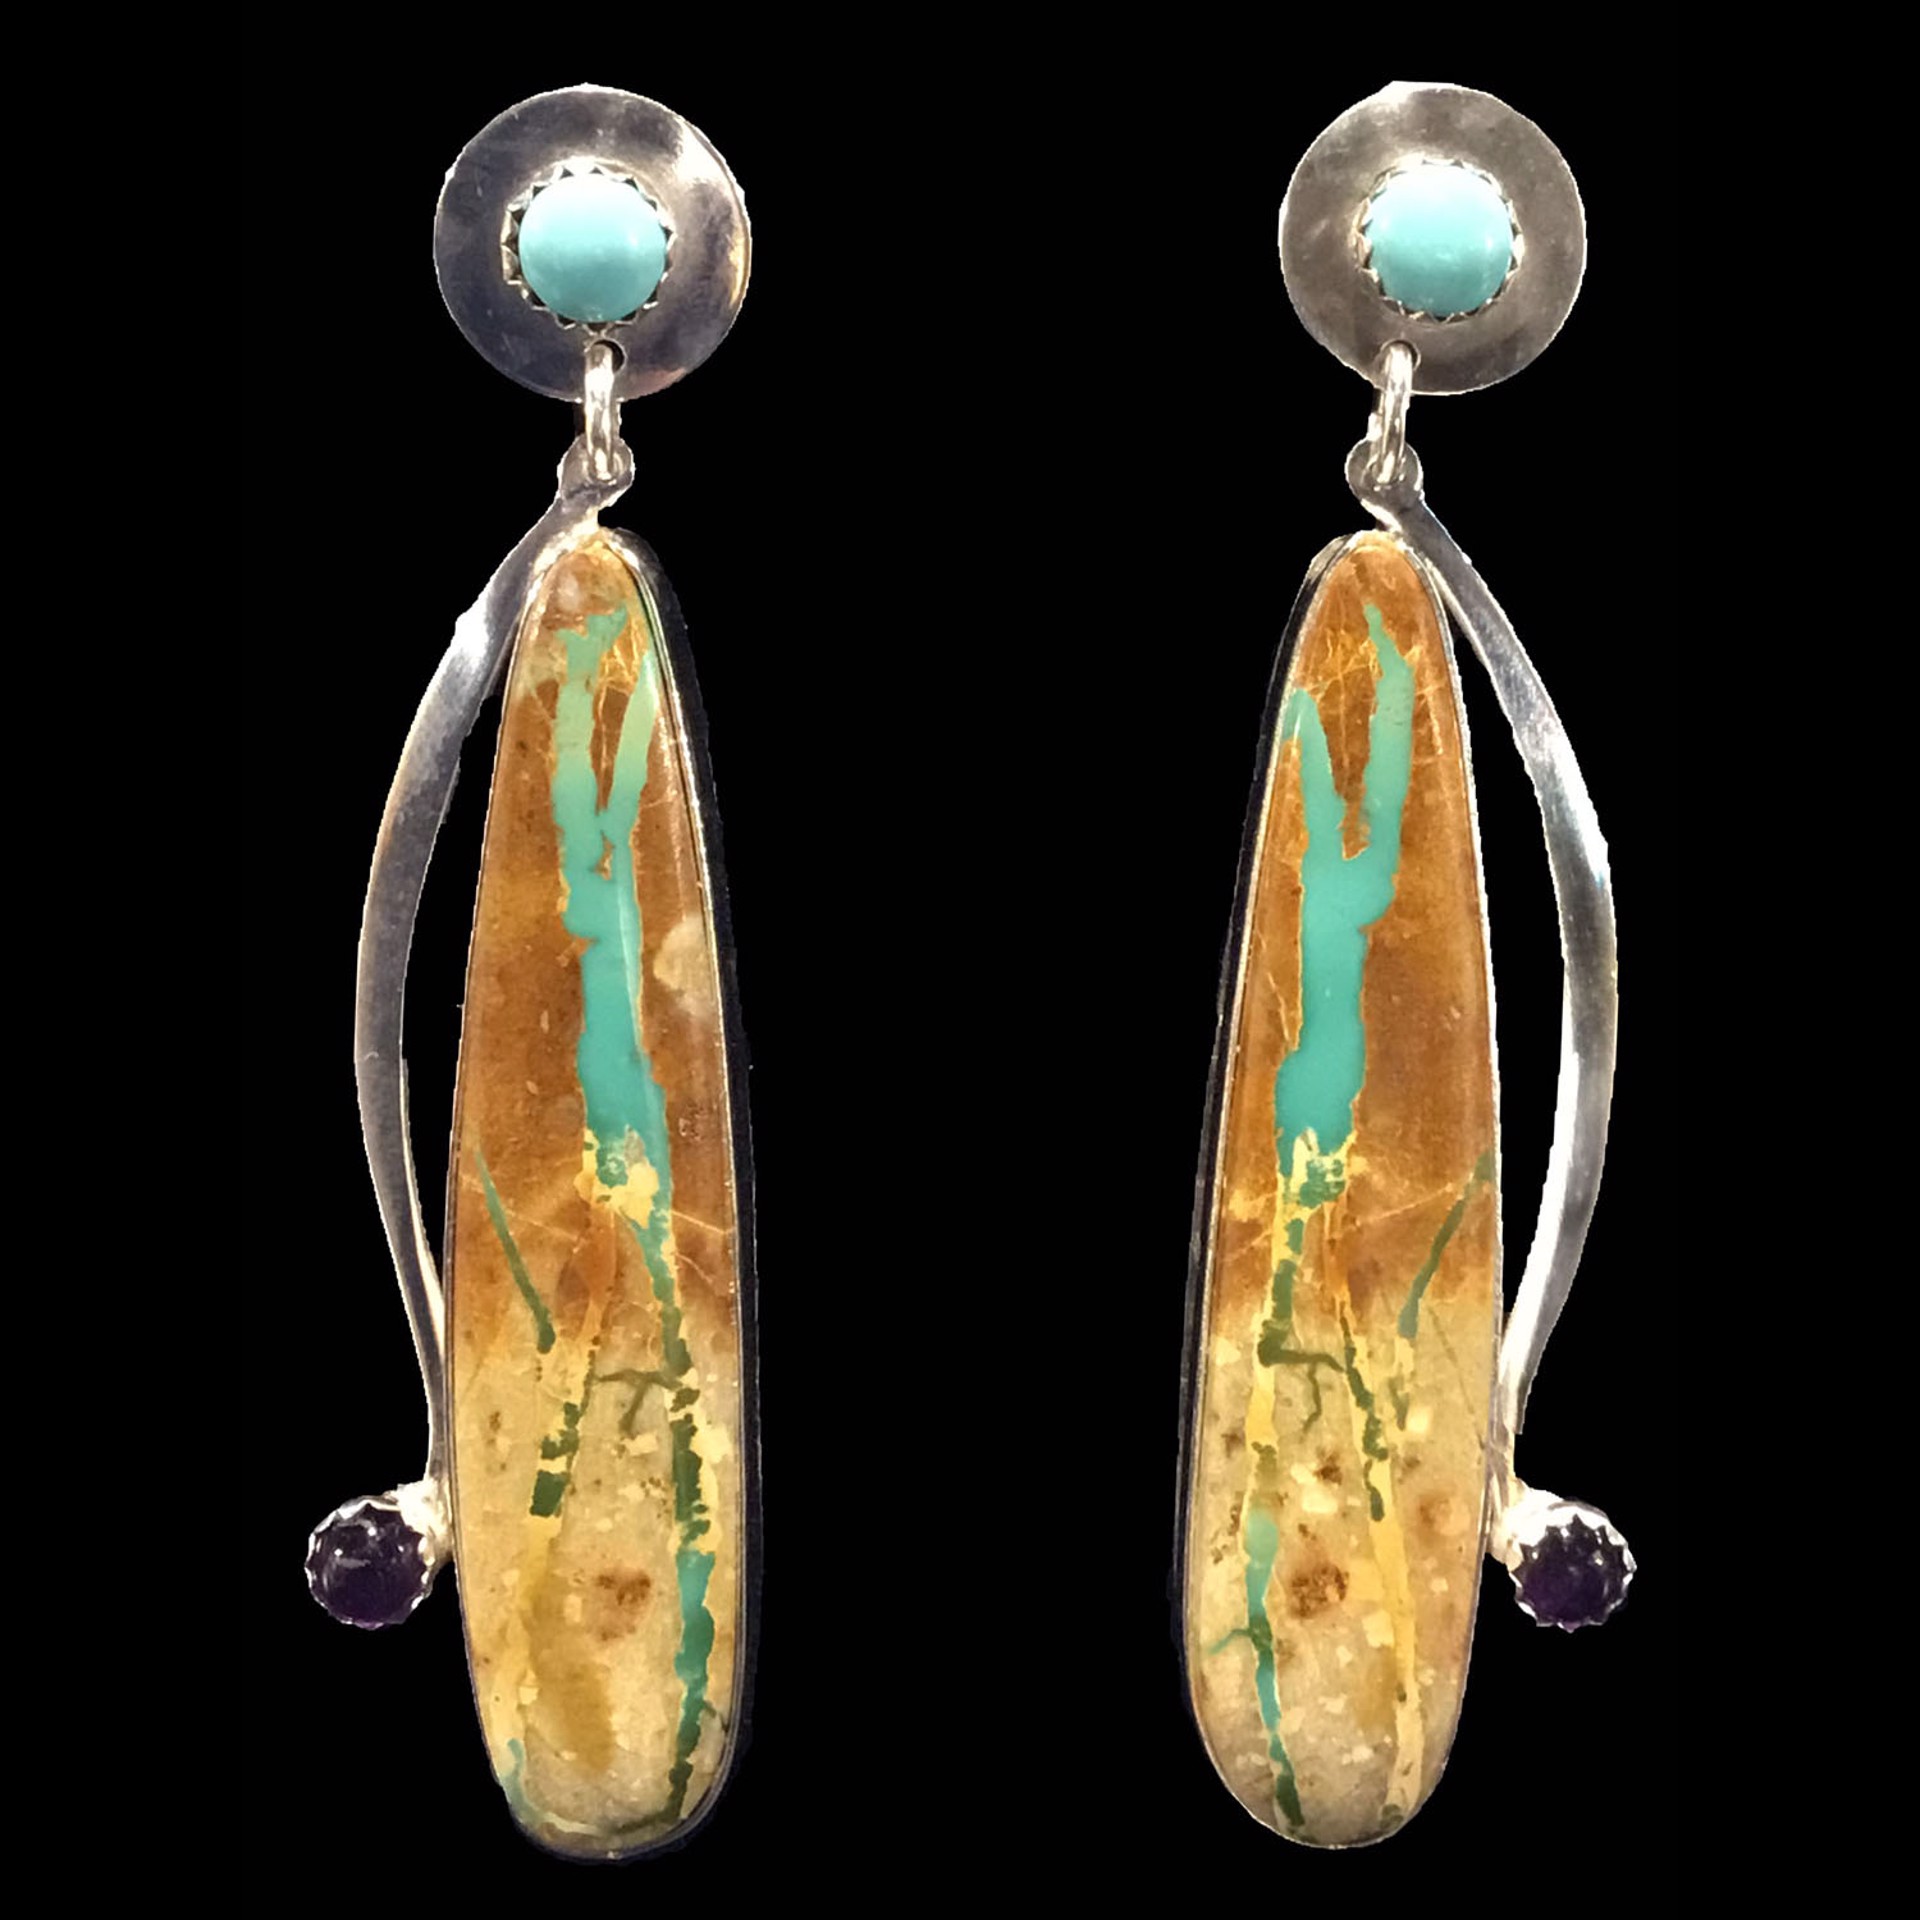 Long Agates, Turquoise and Amy on Side Bars Earrings by Michael Redhawk